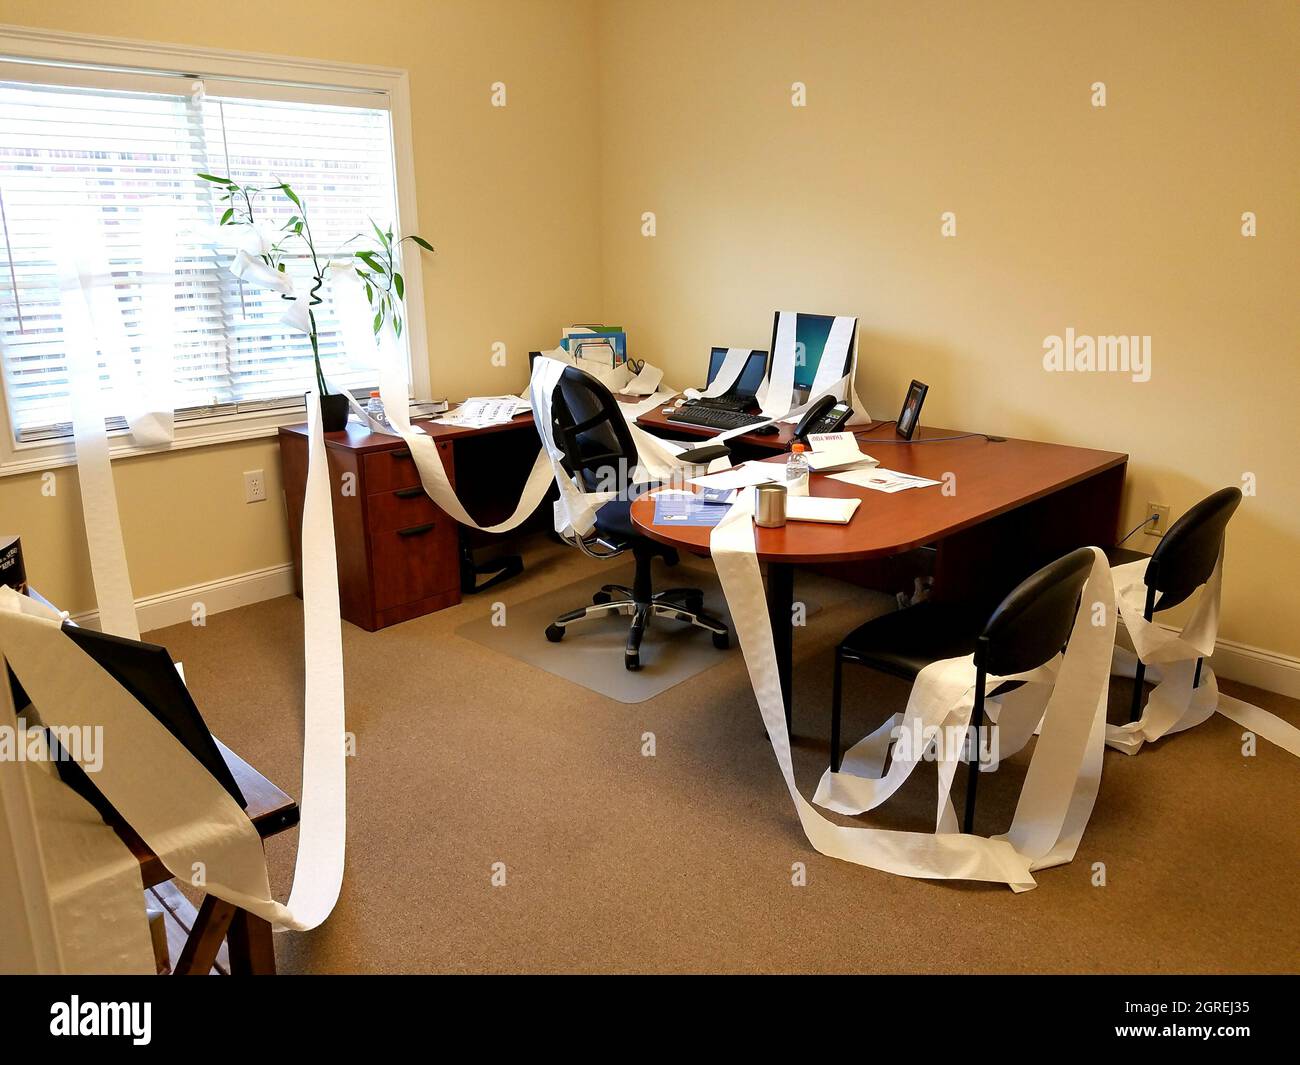 Indoor Office With Toilet Paper Stock Photo - Alamy